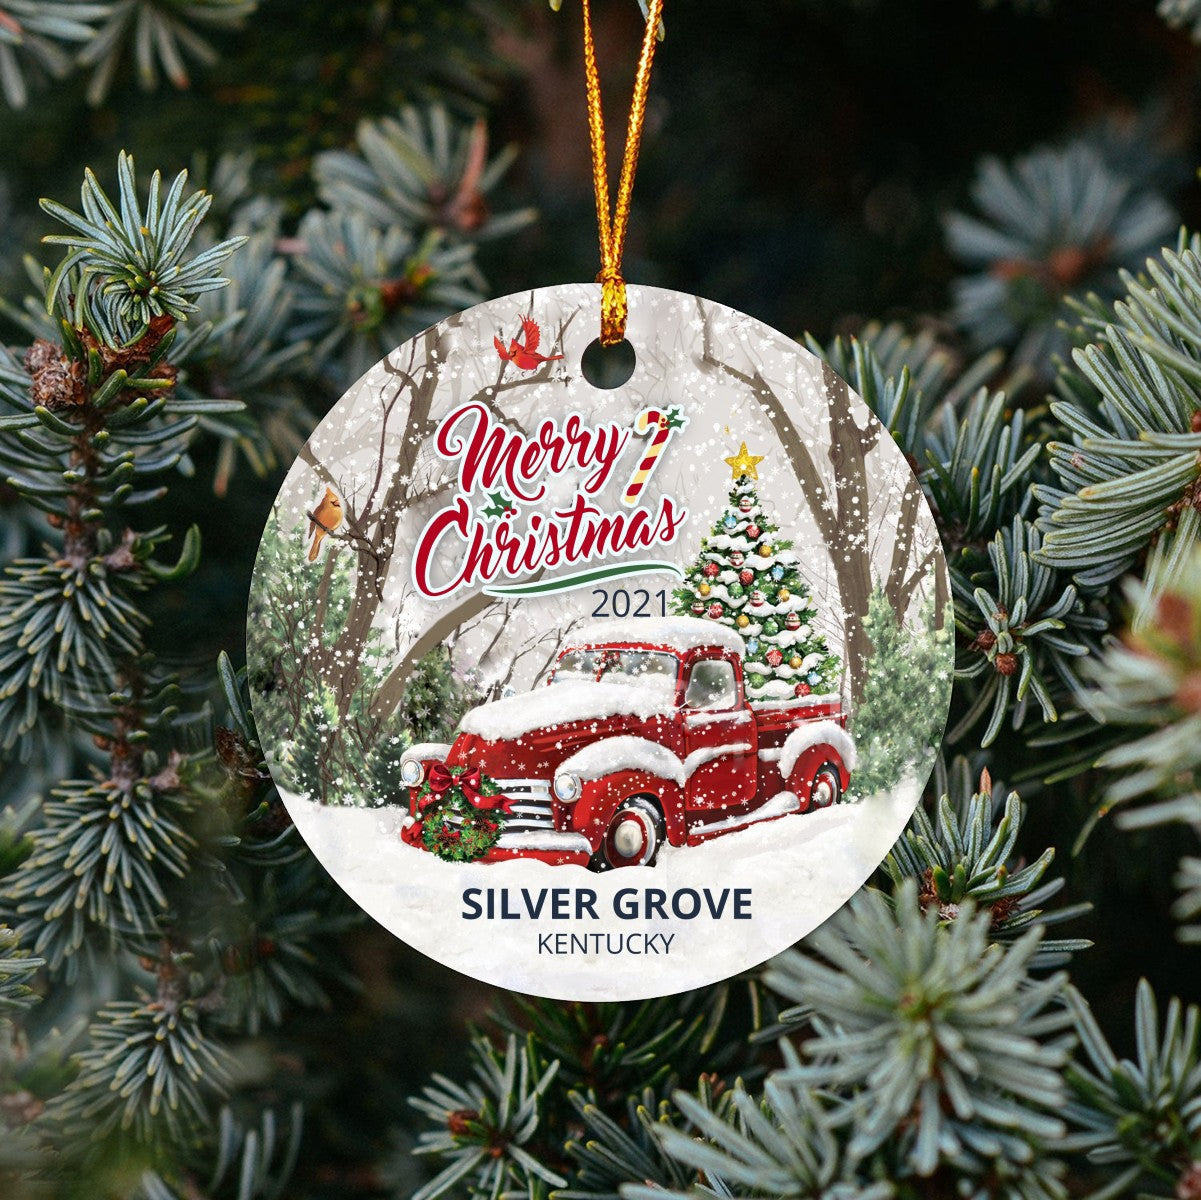 Christmas Tree Ornaments Silver Grove - Ornament Customize With Name City And State Silver Grove Kentucky KY - Red Truck Xmas Ornaments 3'' Plastic Gift For Family, Friend And Housewarming